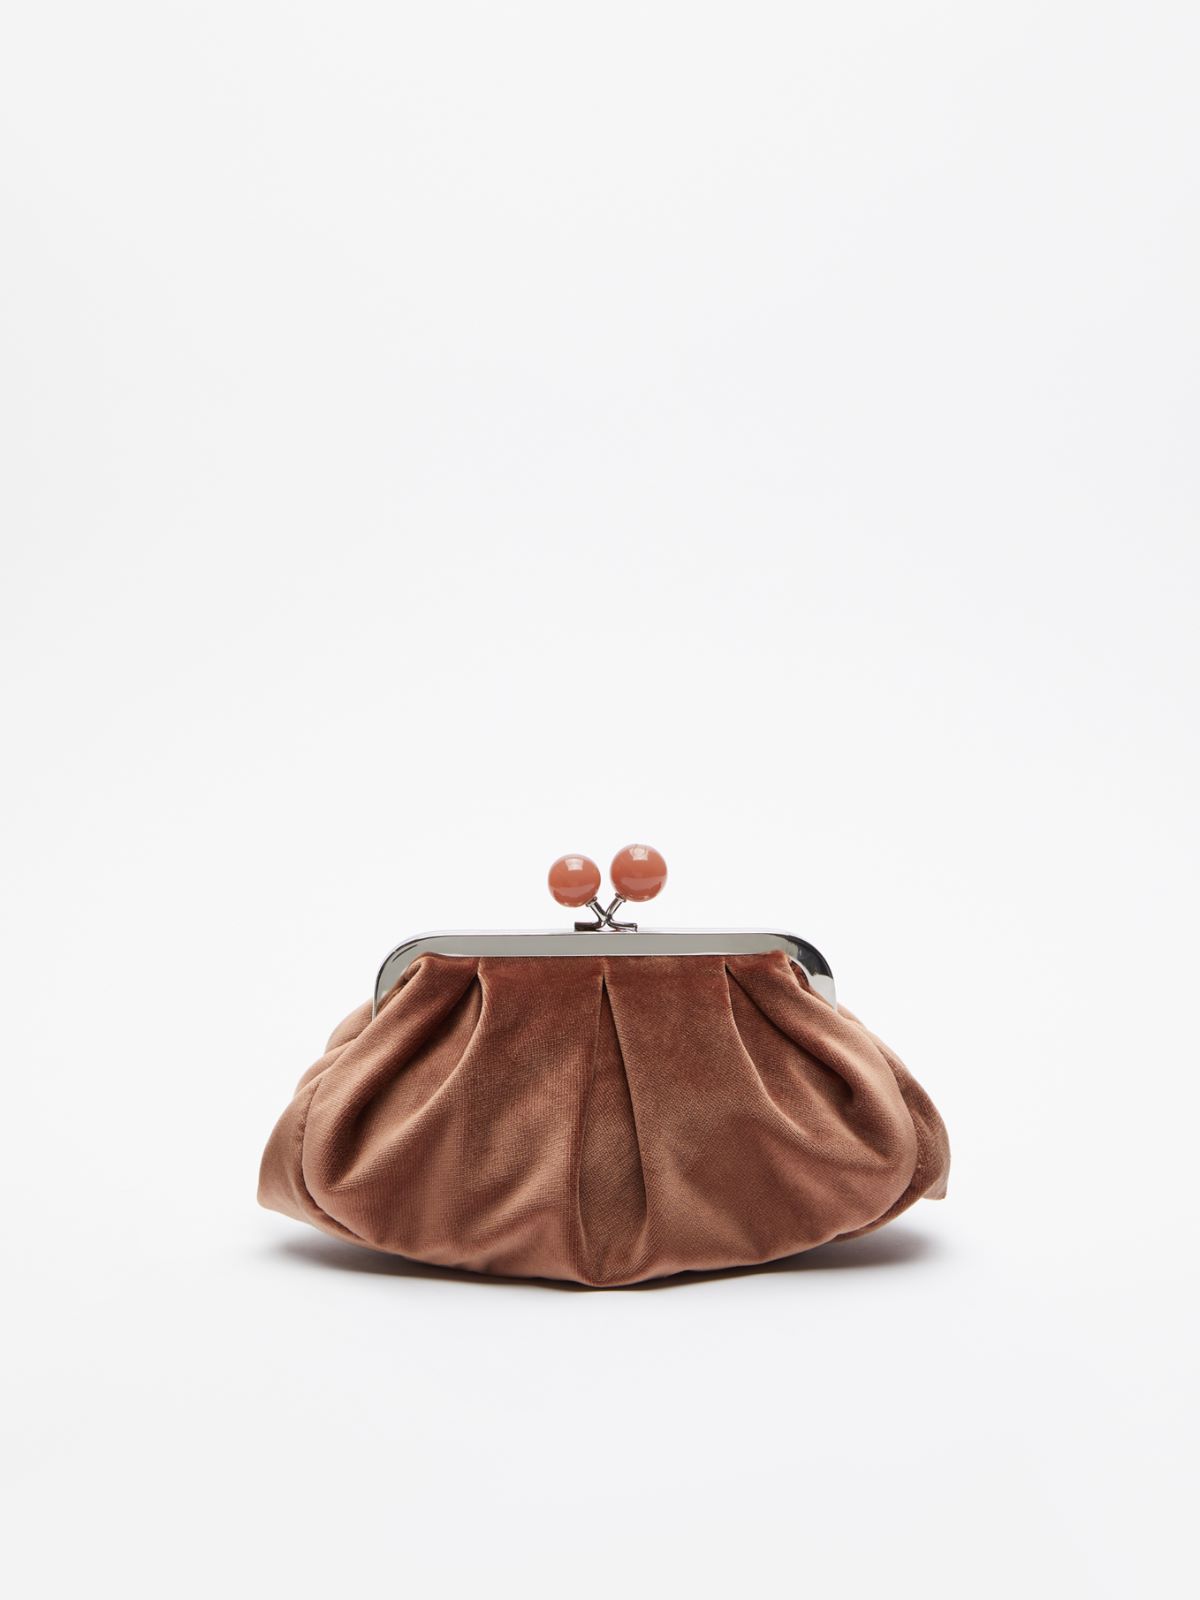 Small Pasticcino Bag in velvet - EARTH - Weekend Max Mara - 3